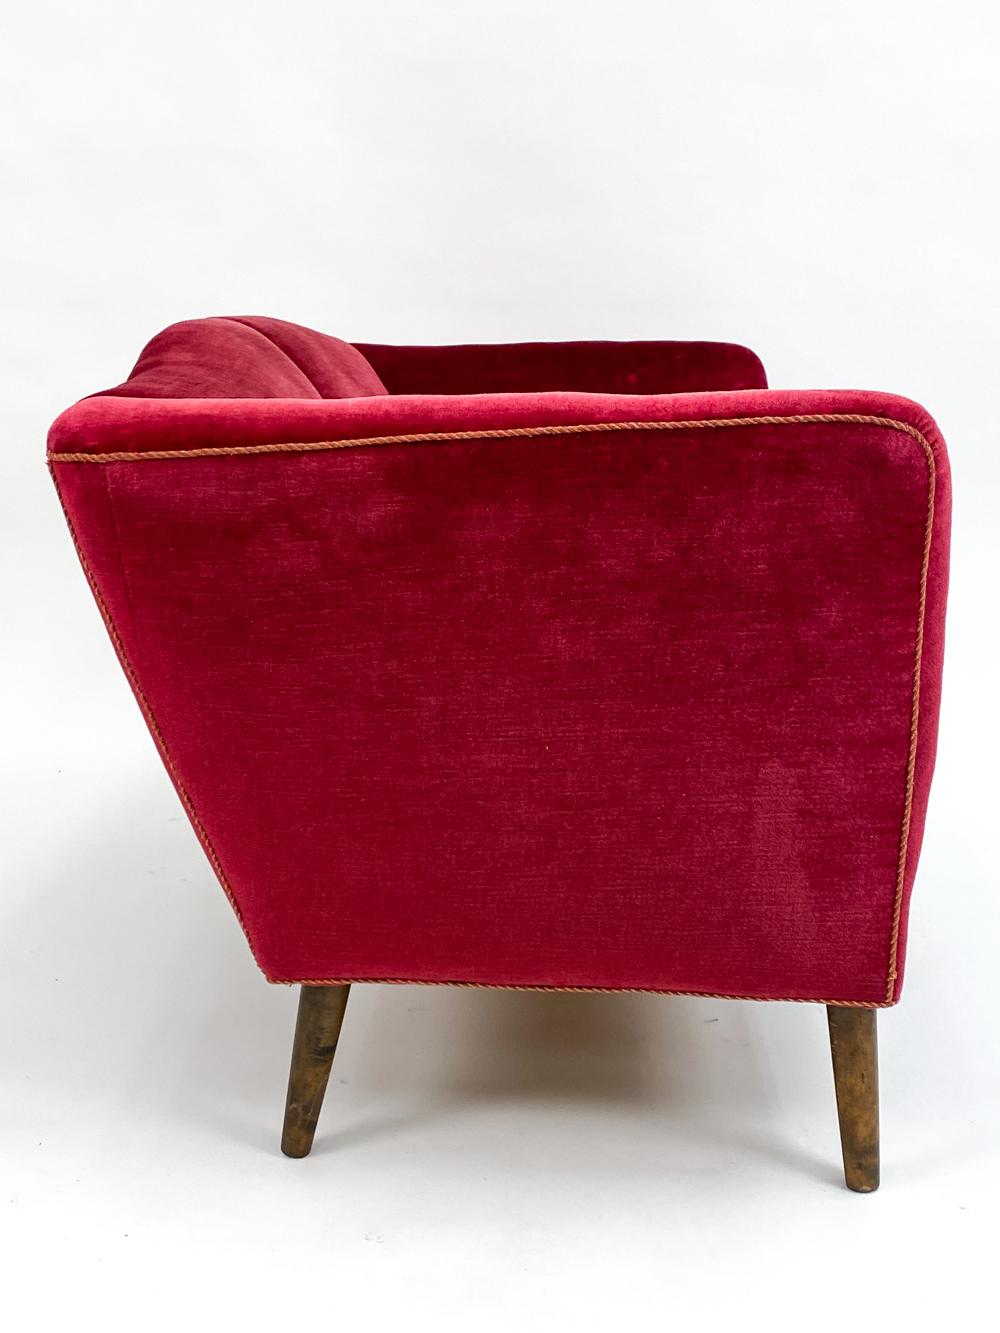 Swedish Mid-Century Beech & Red Mohair Sofa, c. 1950's For Sale 6